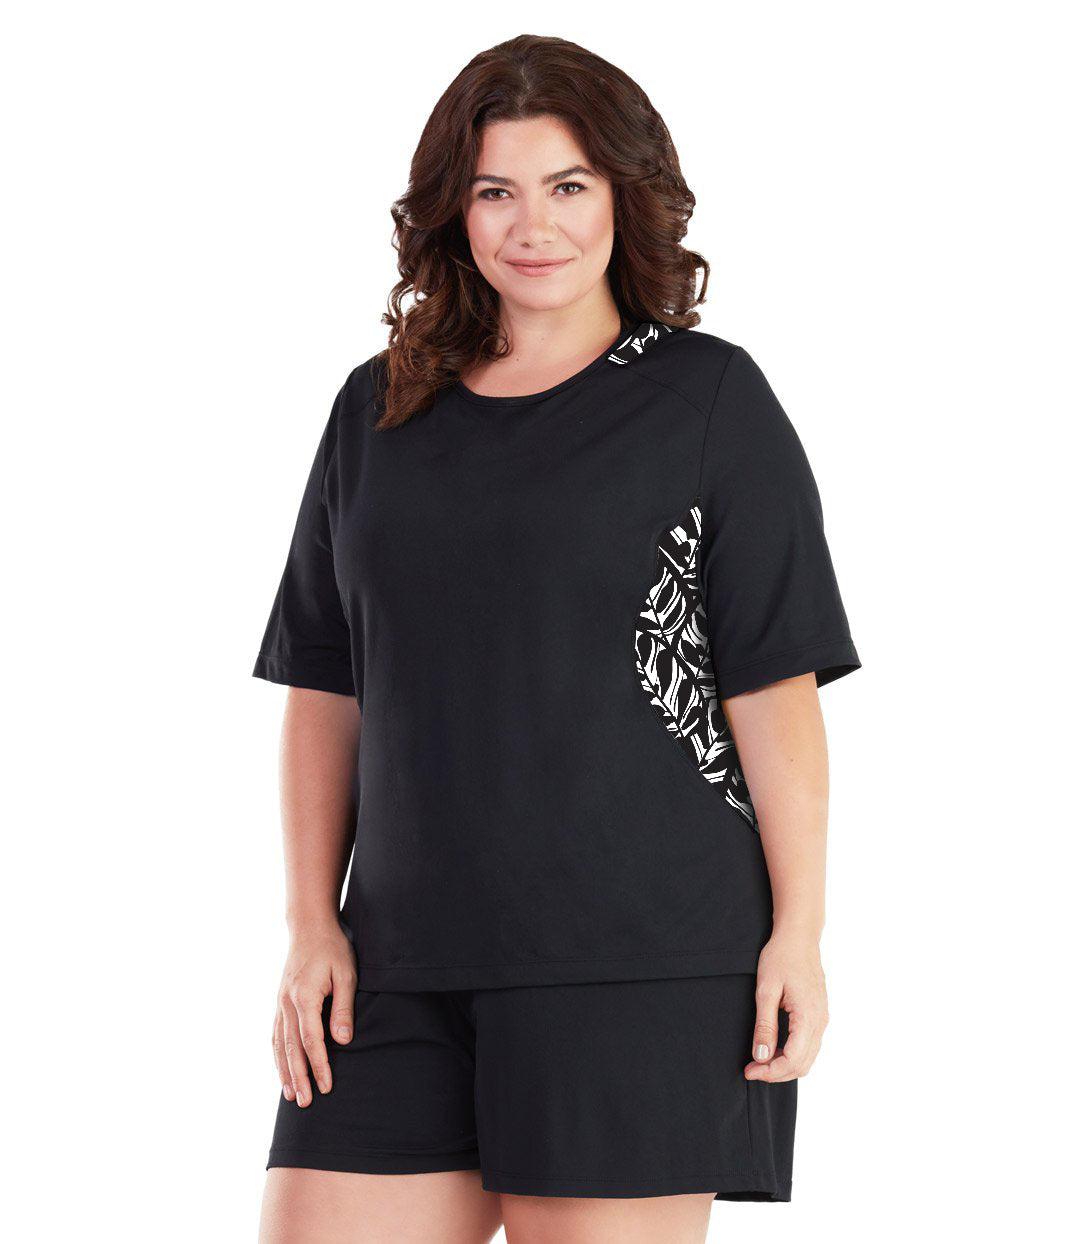 Plus size woman, facing front, wearing AquaSport Colorblock Swim Tee Tropical Black. Tropical black and white print  colorblocking on waist and shoulders. Long cover short sleeves meeting at the elbow and a rounded neckline. 